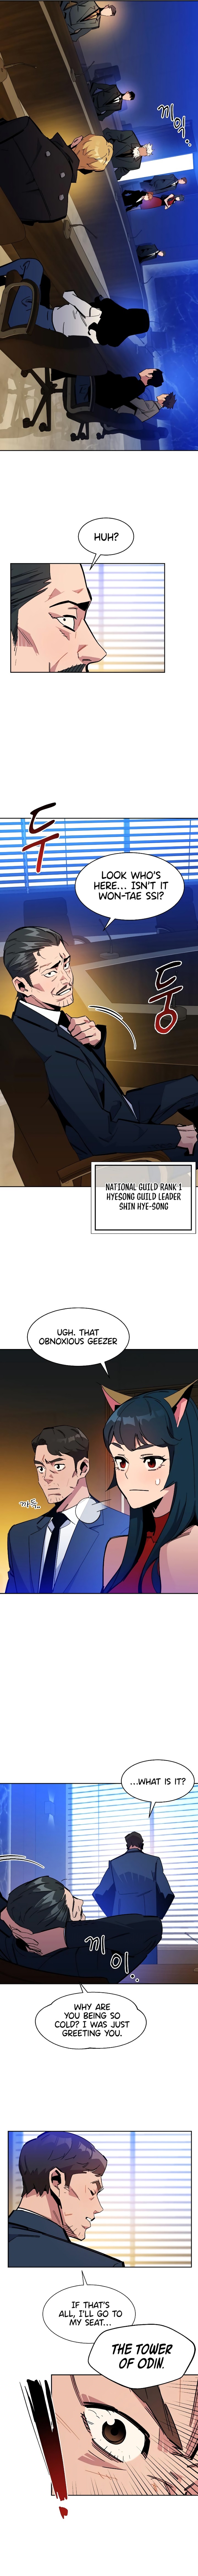 Auto-Hunting With Clones - Chapter 21 Page 6